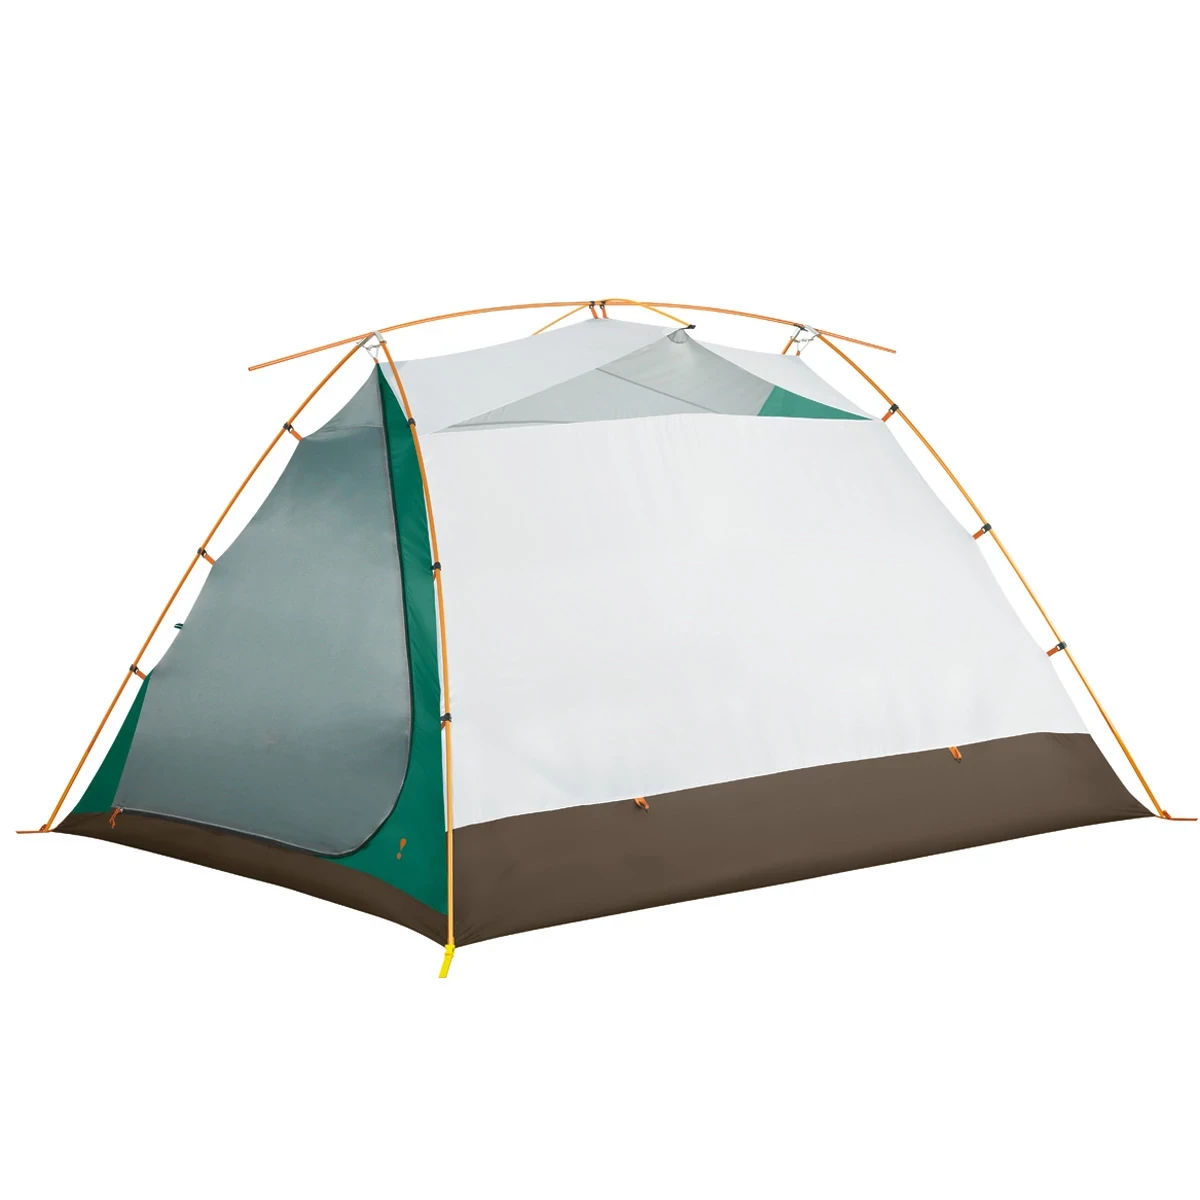 Timberline SQ Outfitter 6 person tent without rain fly